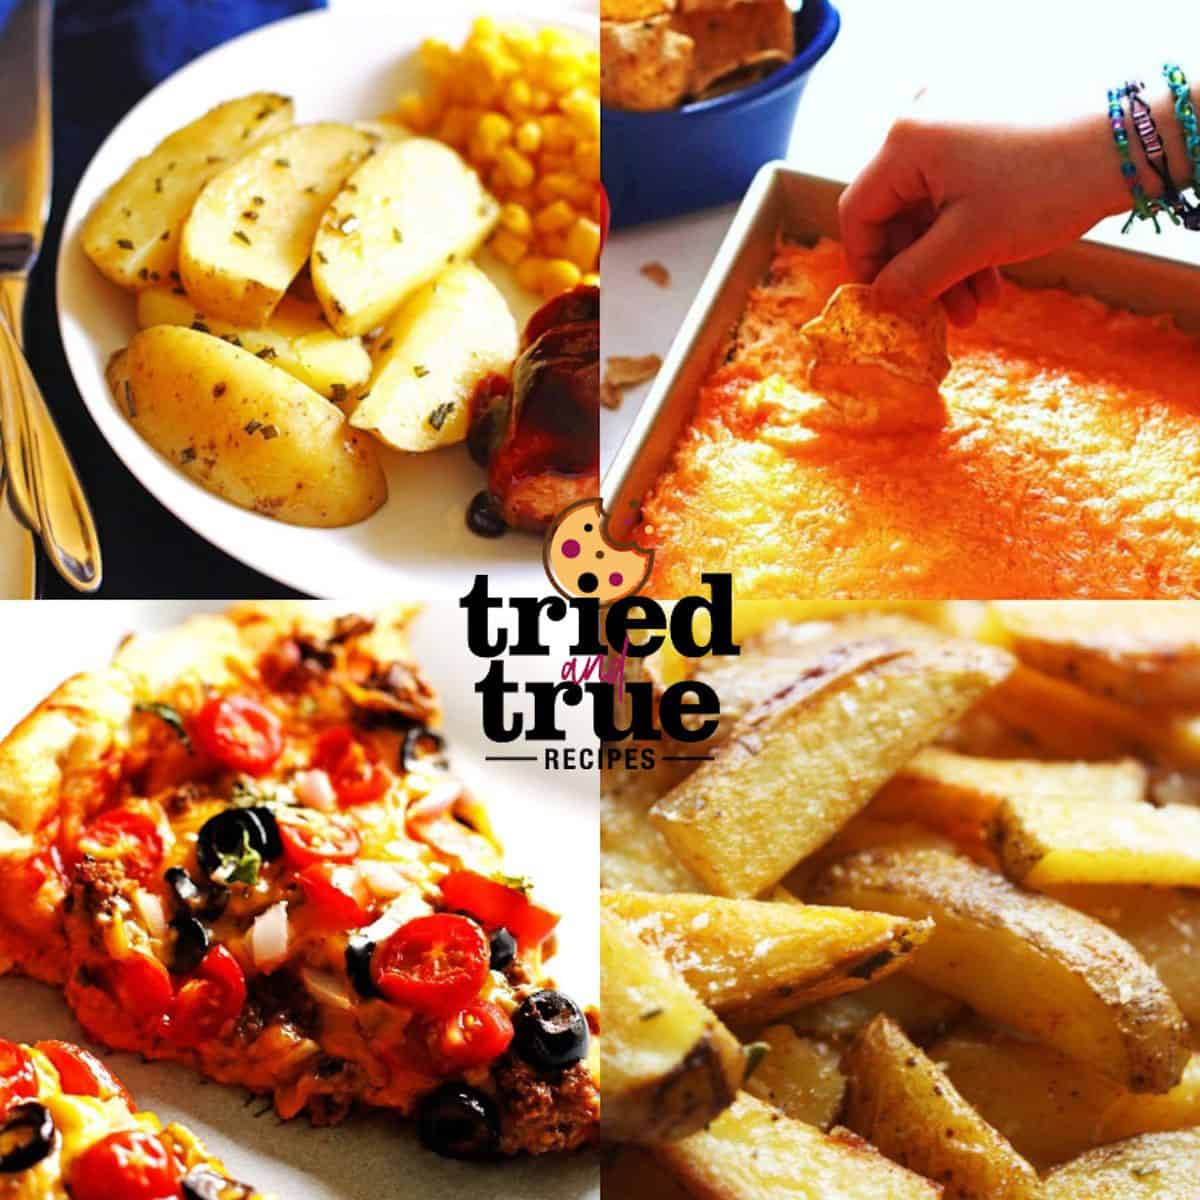 A collage of images showing appetizers for pizza - taco pizza, buffalo chicken dip, potato wedges, and baked french fries.